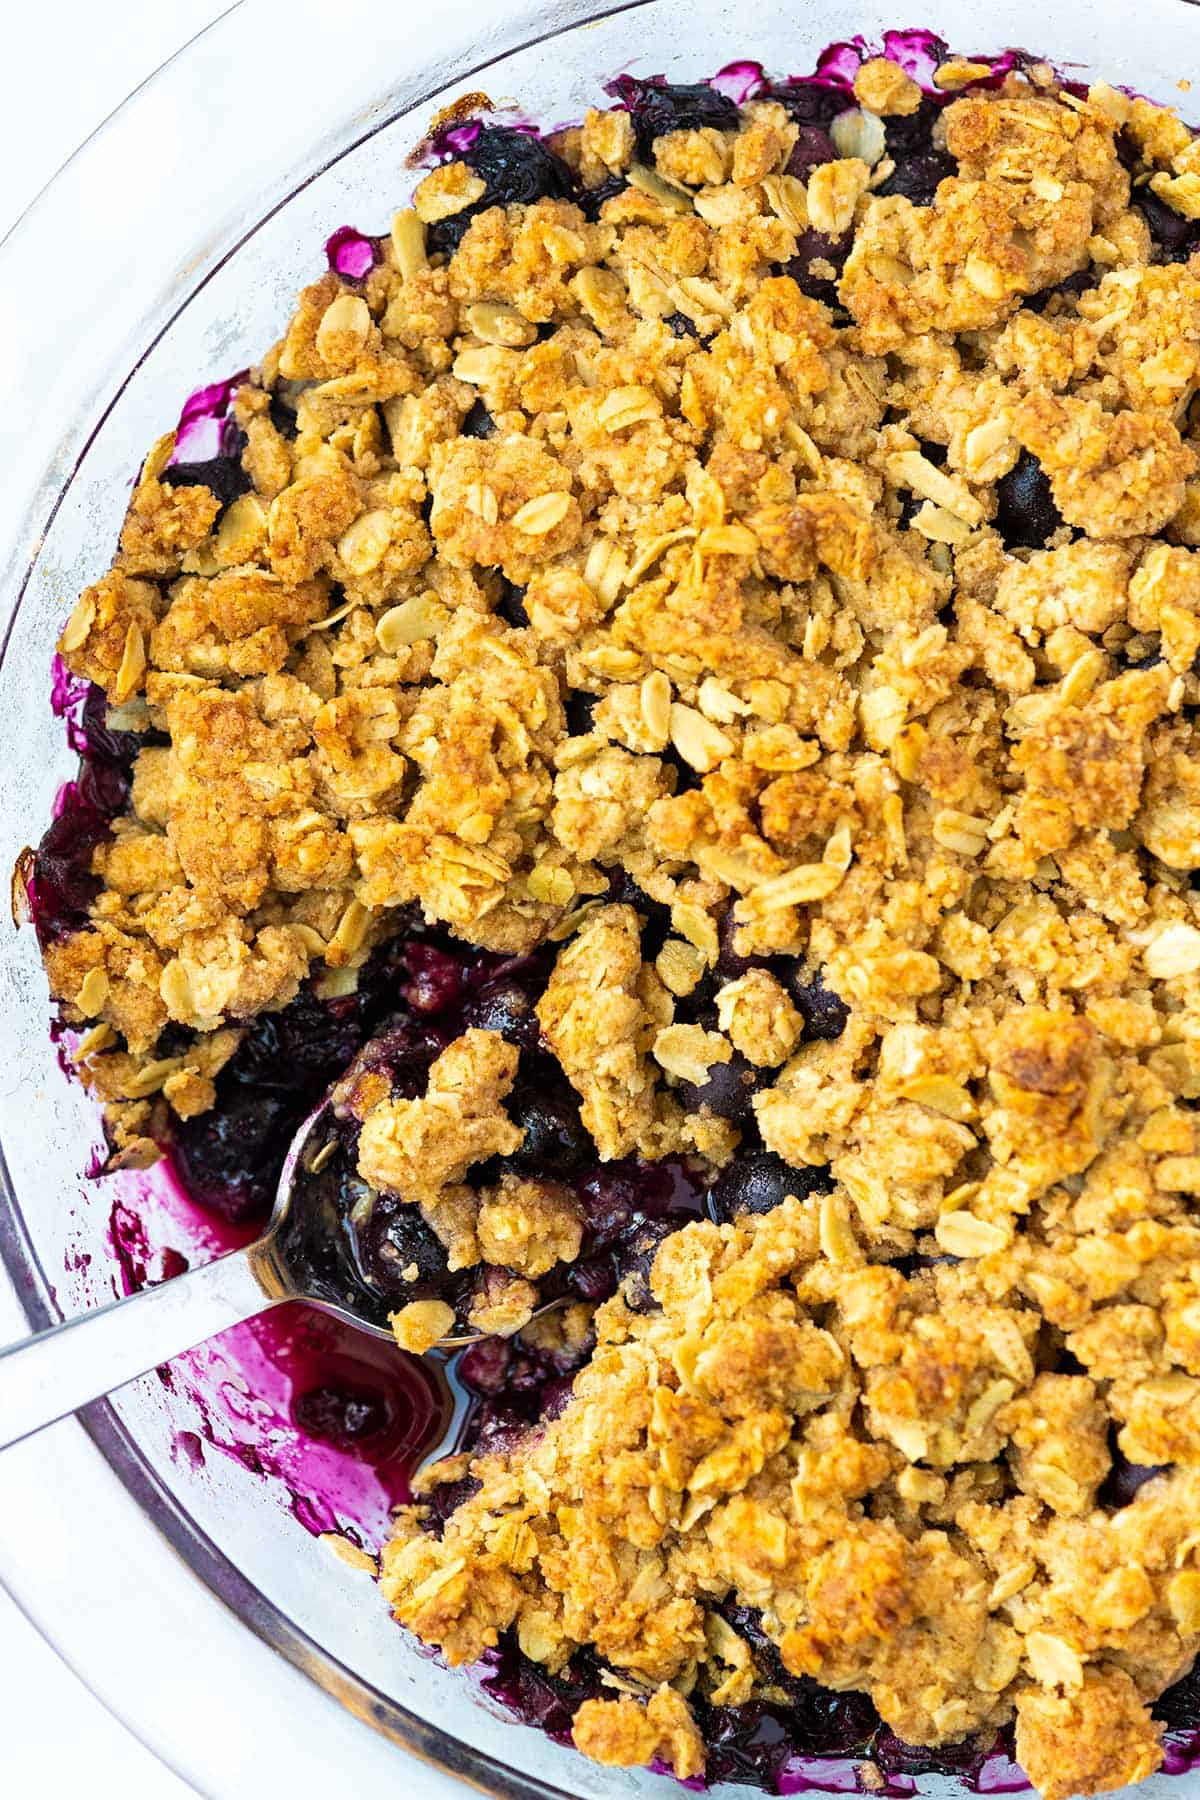 Blueberry Crumble with a topping made from flour, butter and oats.